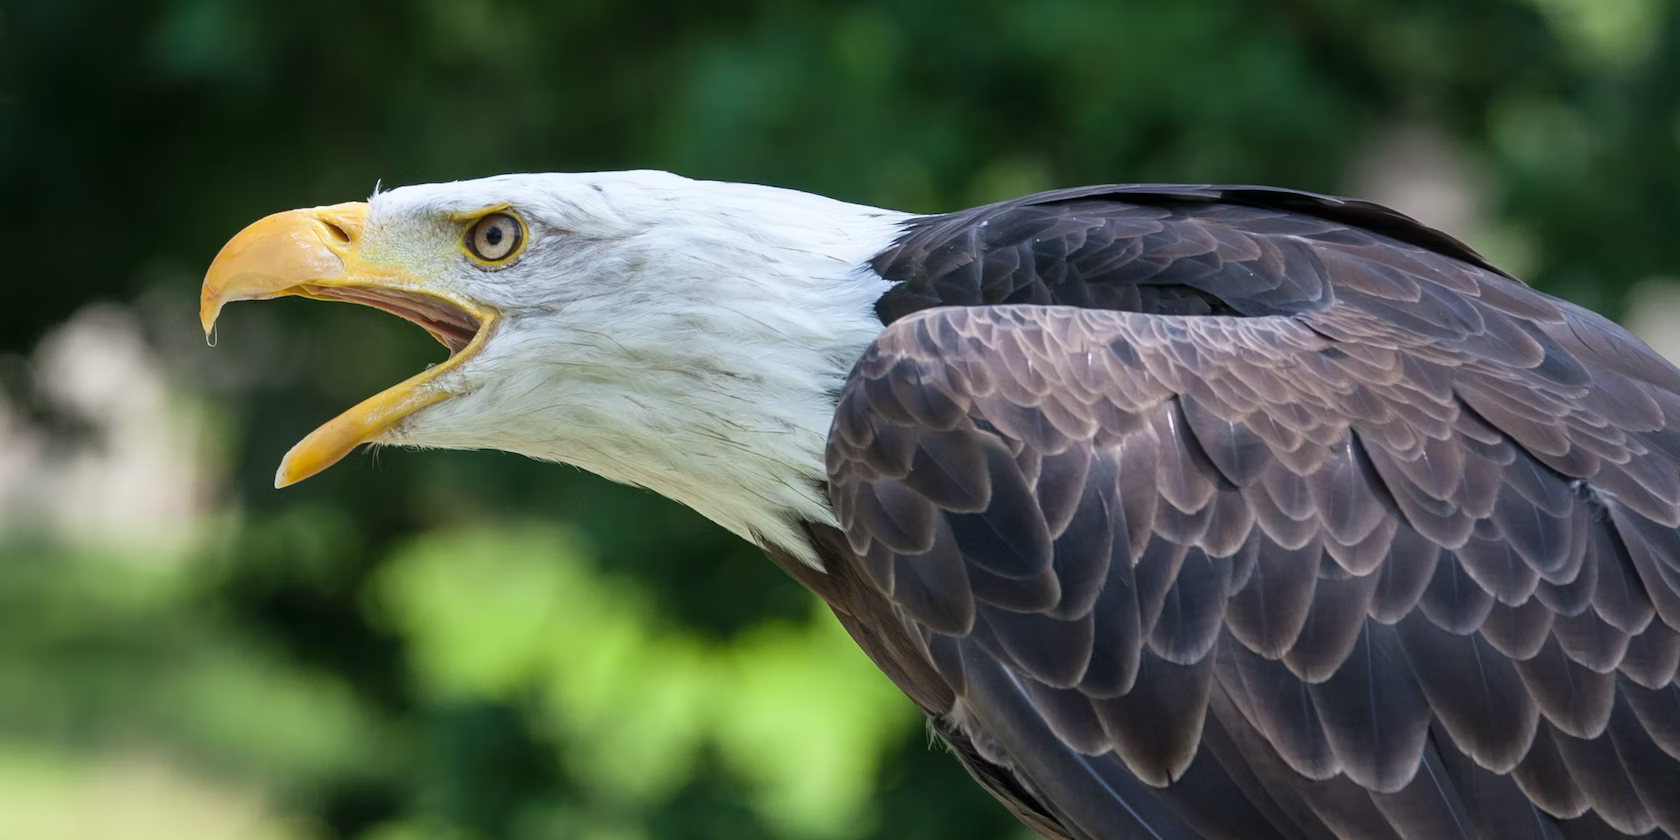 An intense-looking eagle yelling against a blurred green background